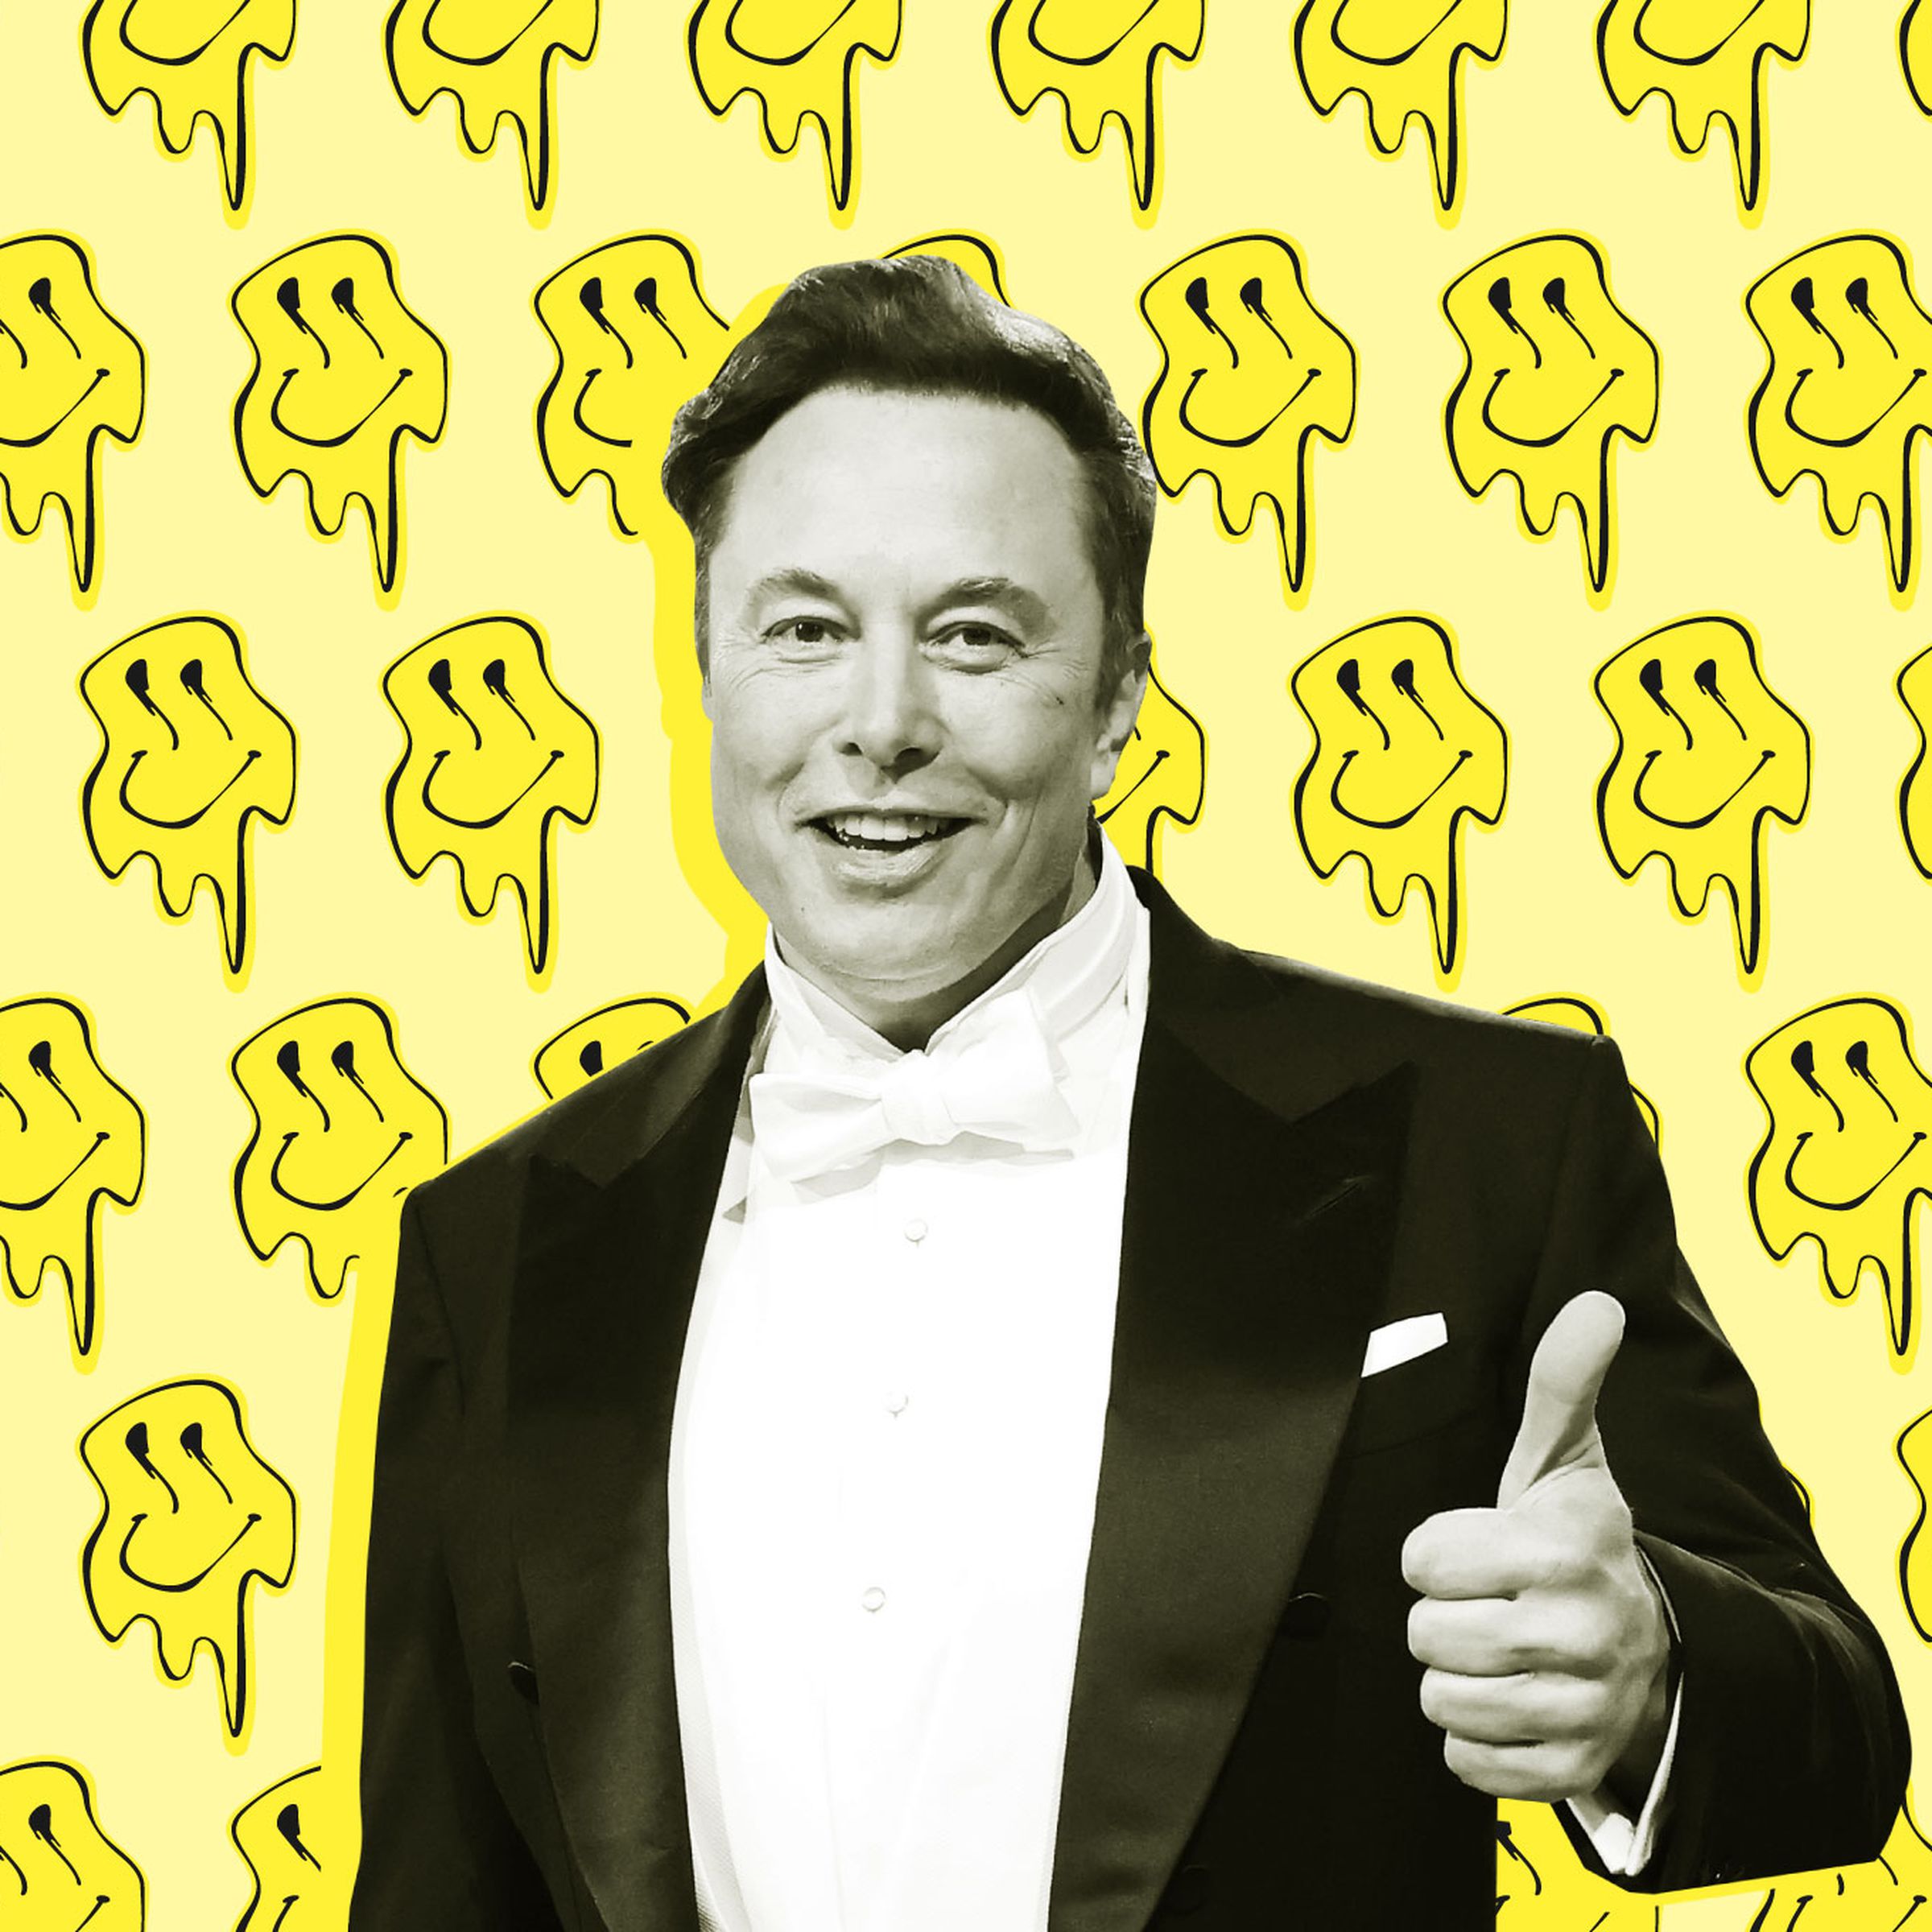 Elon Musk gives a thumbs up while smiley faces melt in the background